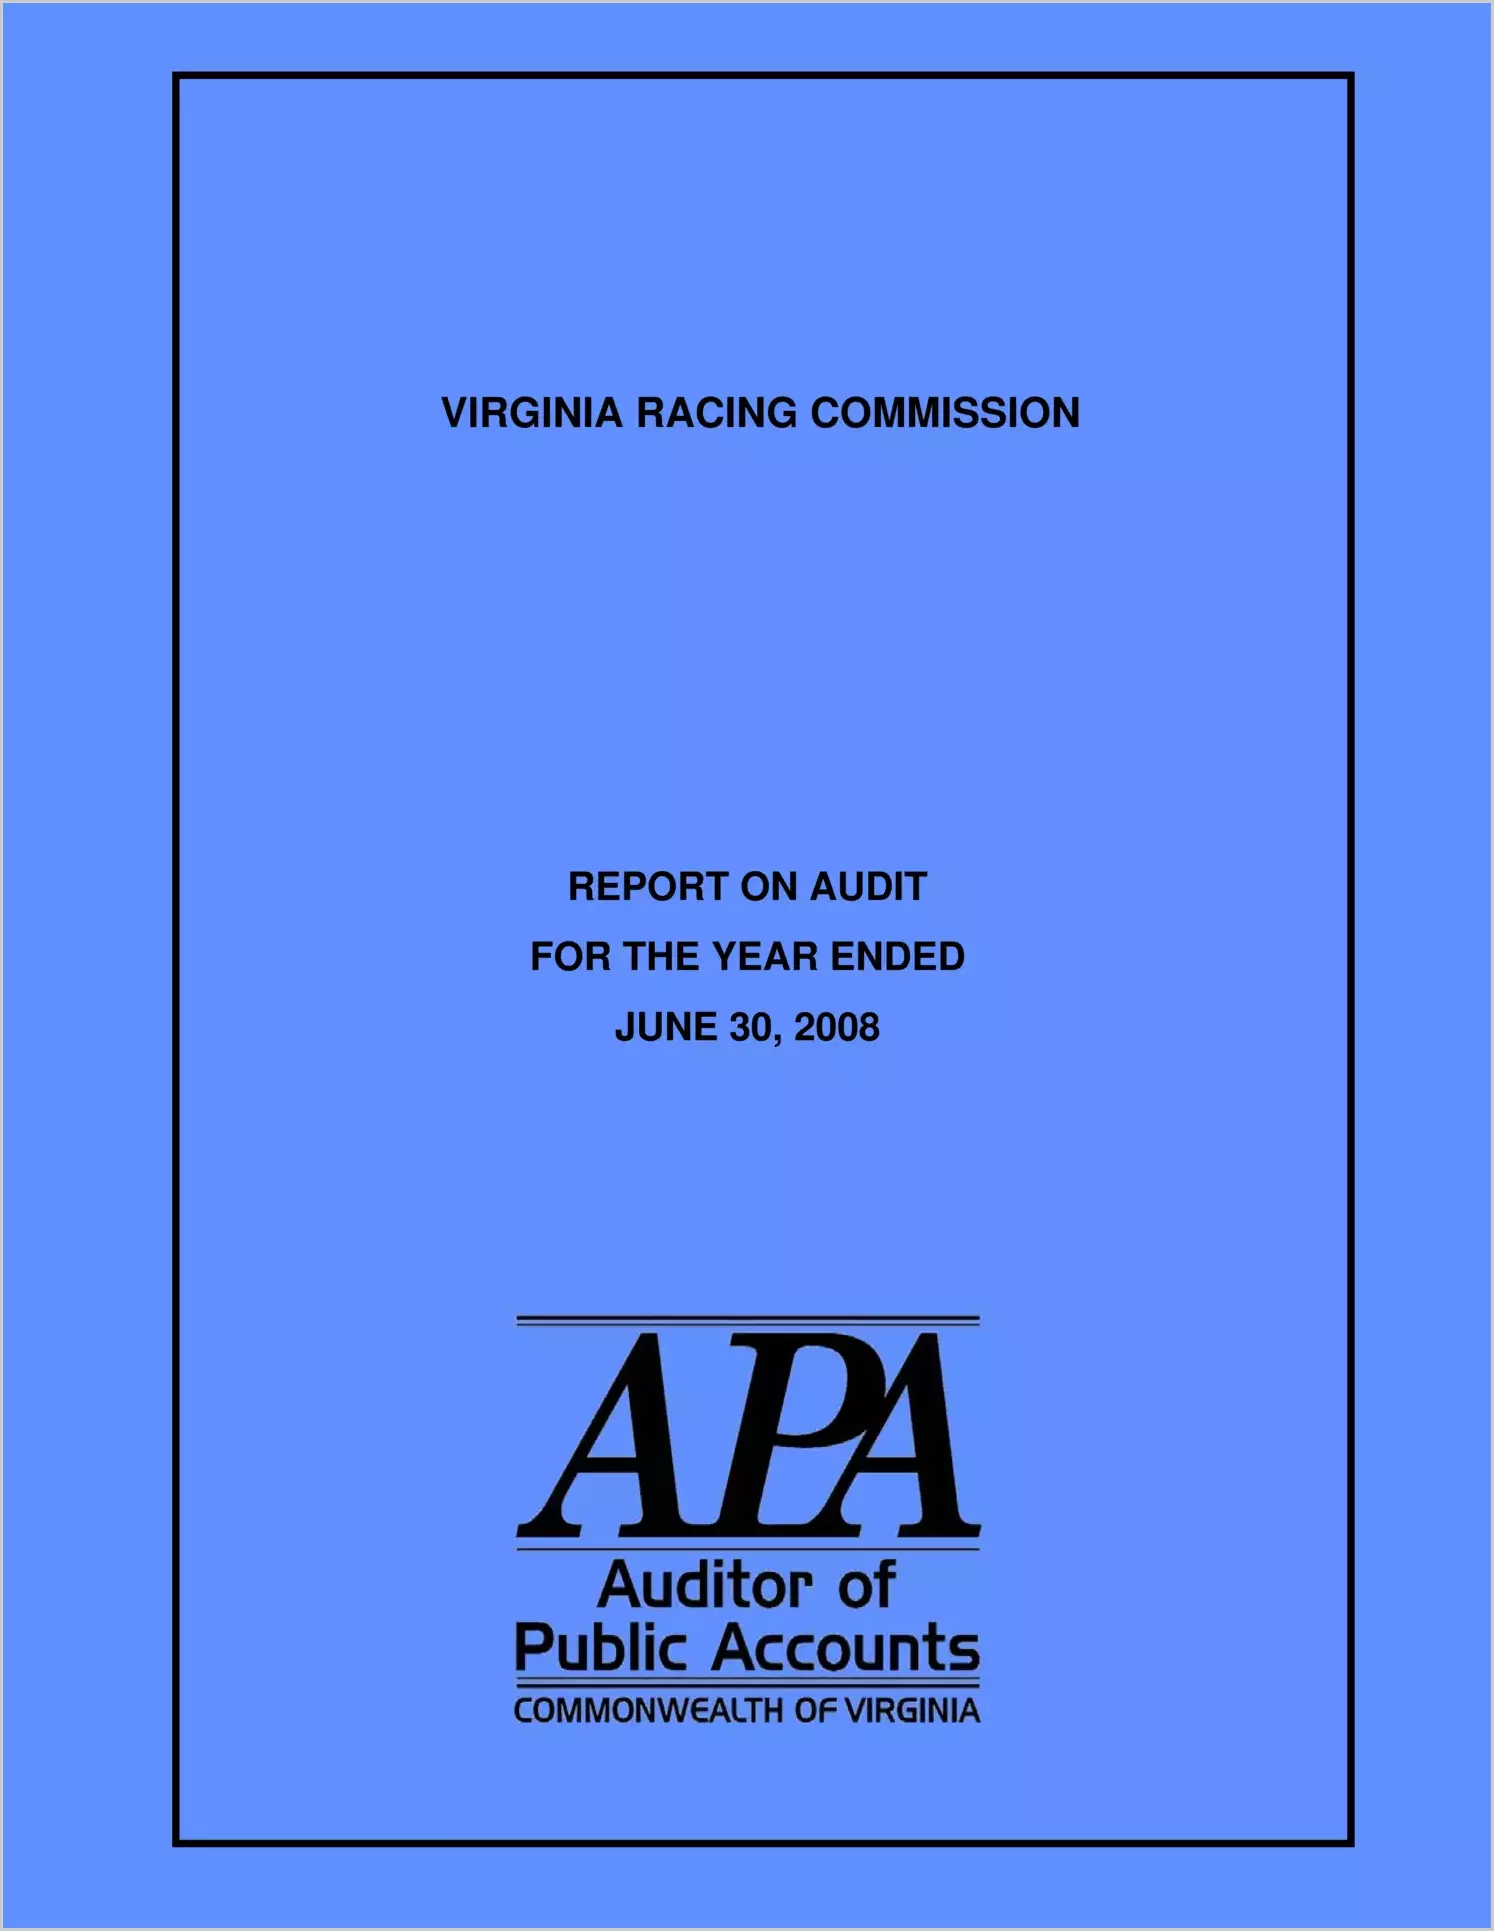 Virginia Racing Commission for the year ended June 30, 2008